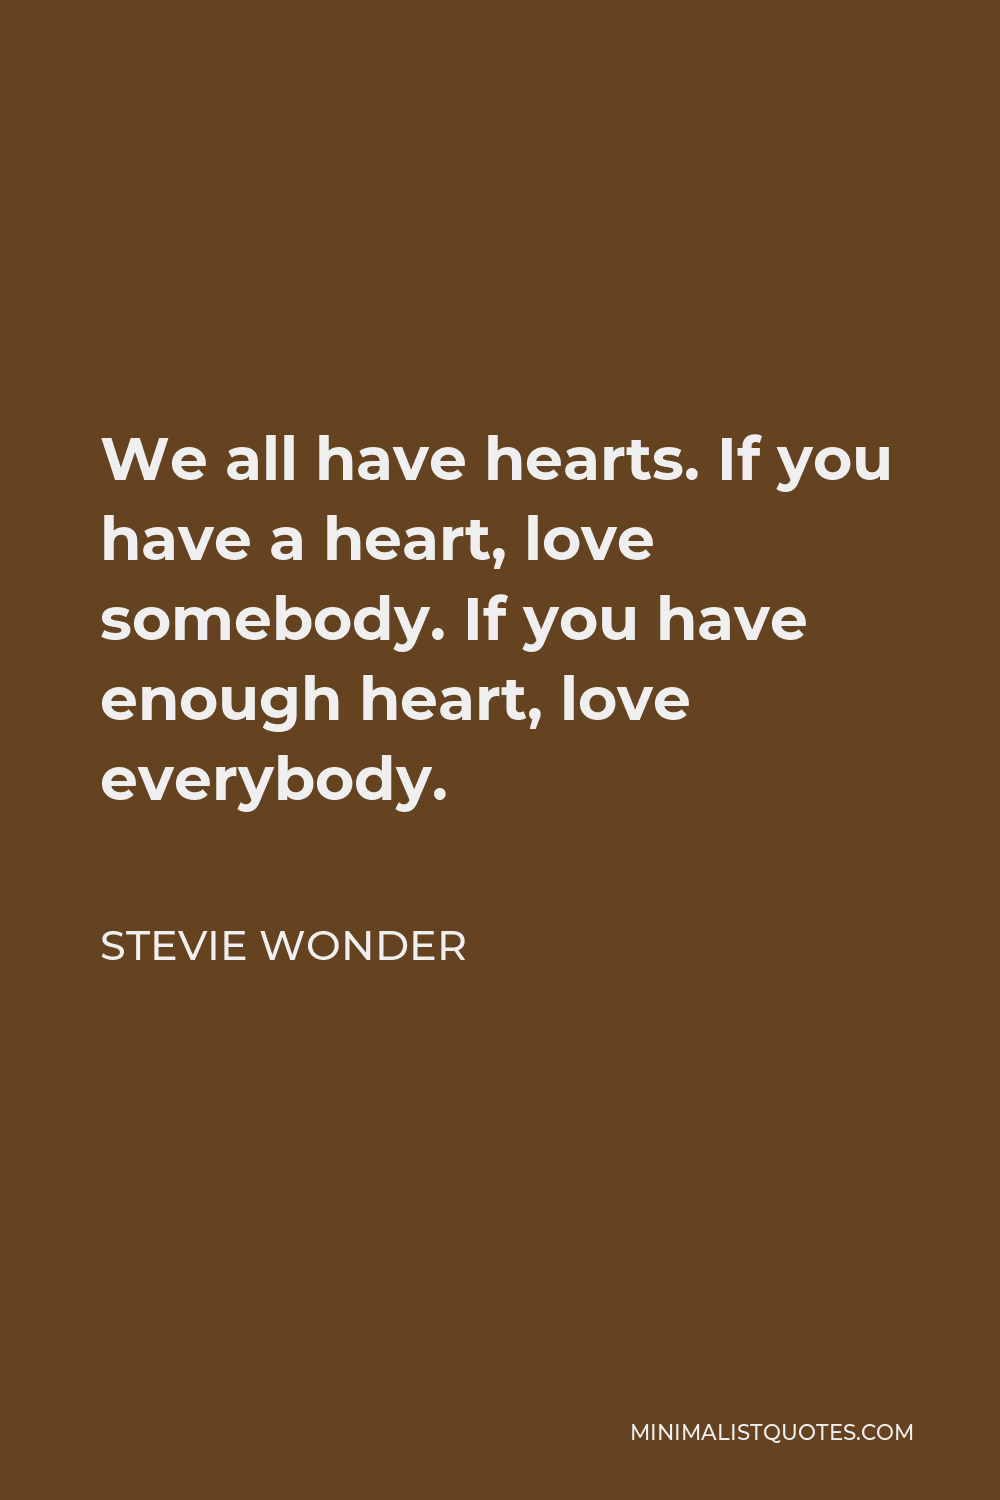 Stevie Wonder Quote - We all have hearts. If you have a heart, love somebody. If you have enough heart, love everybody.